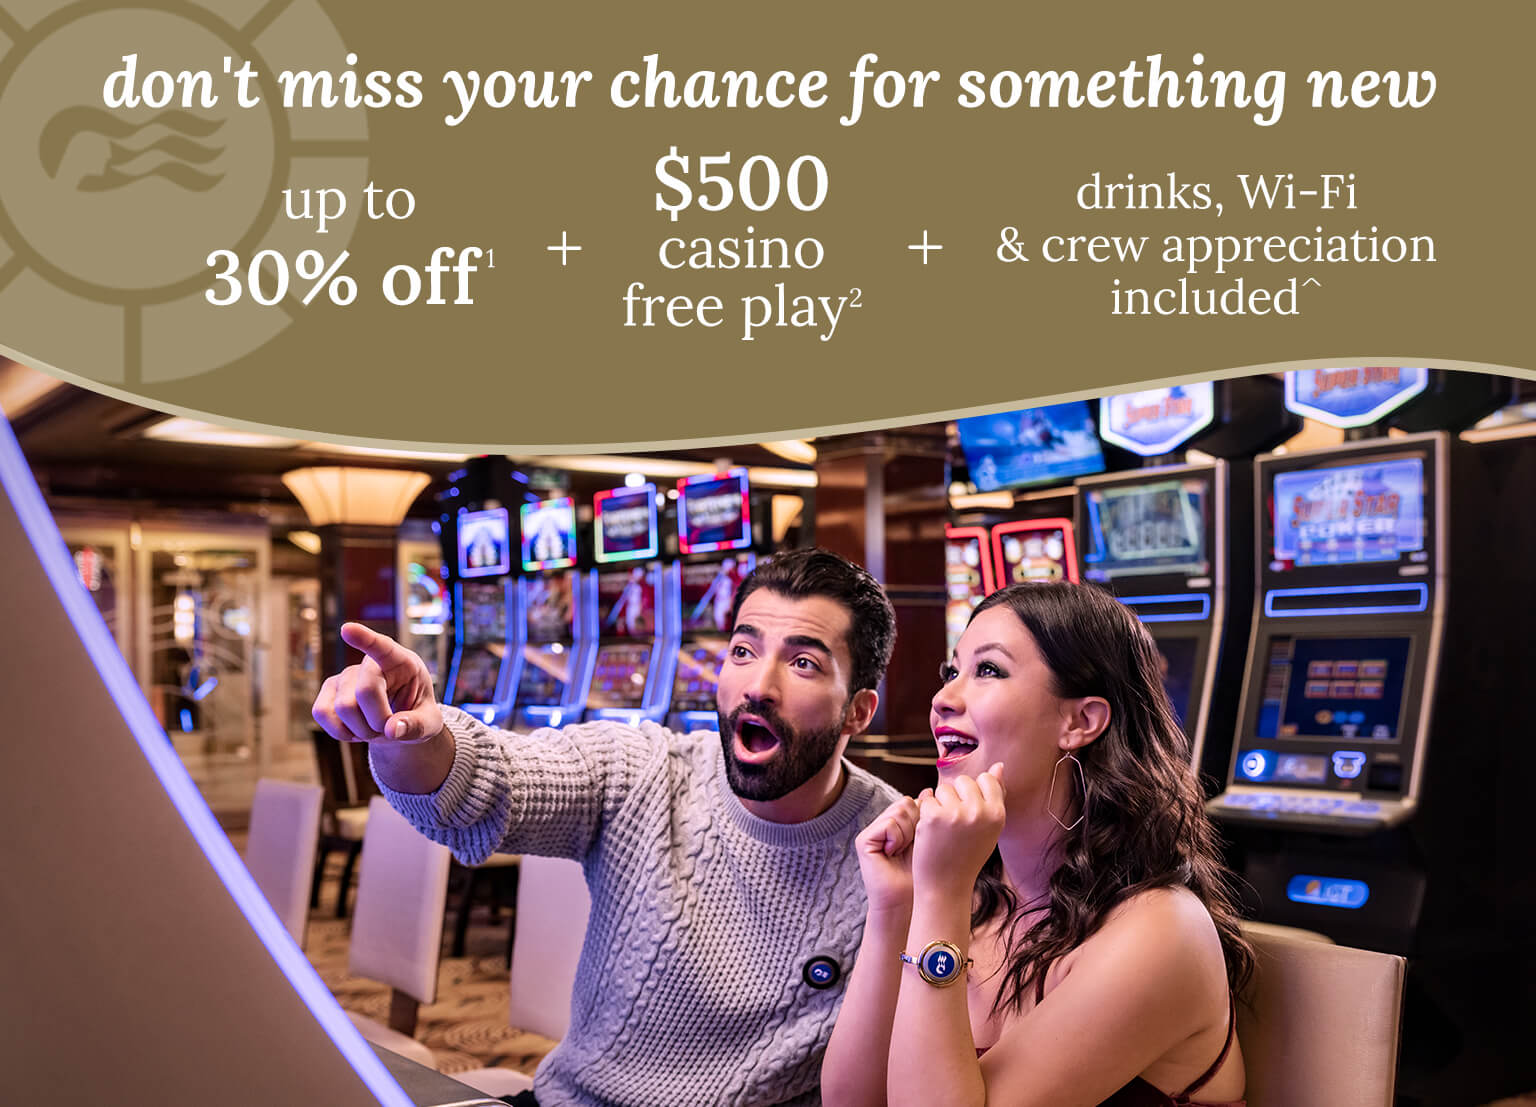 up to 30% off + $500 casino free play + drinks, Wi-Fi & crew appreciation included